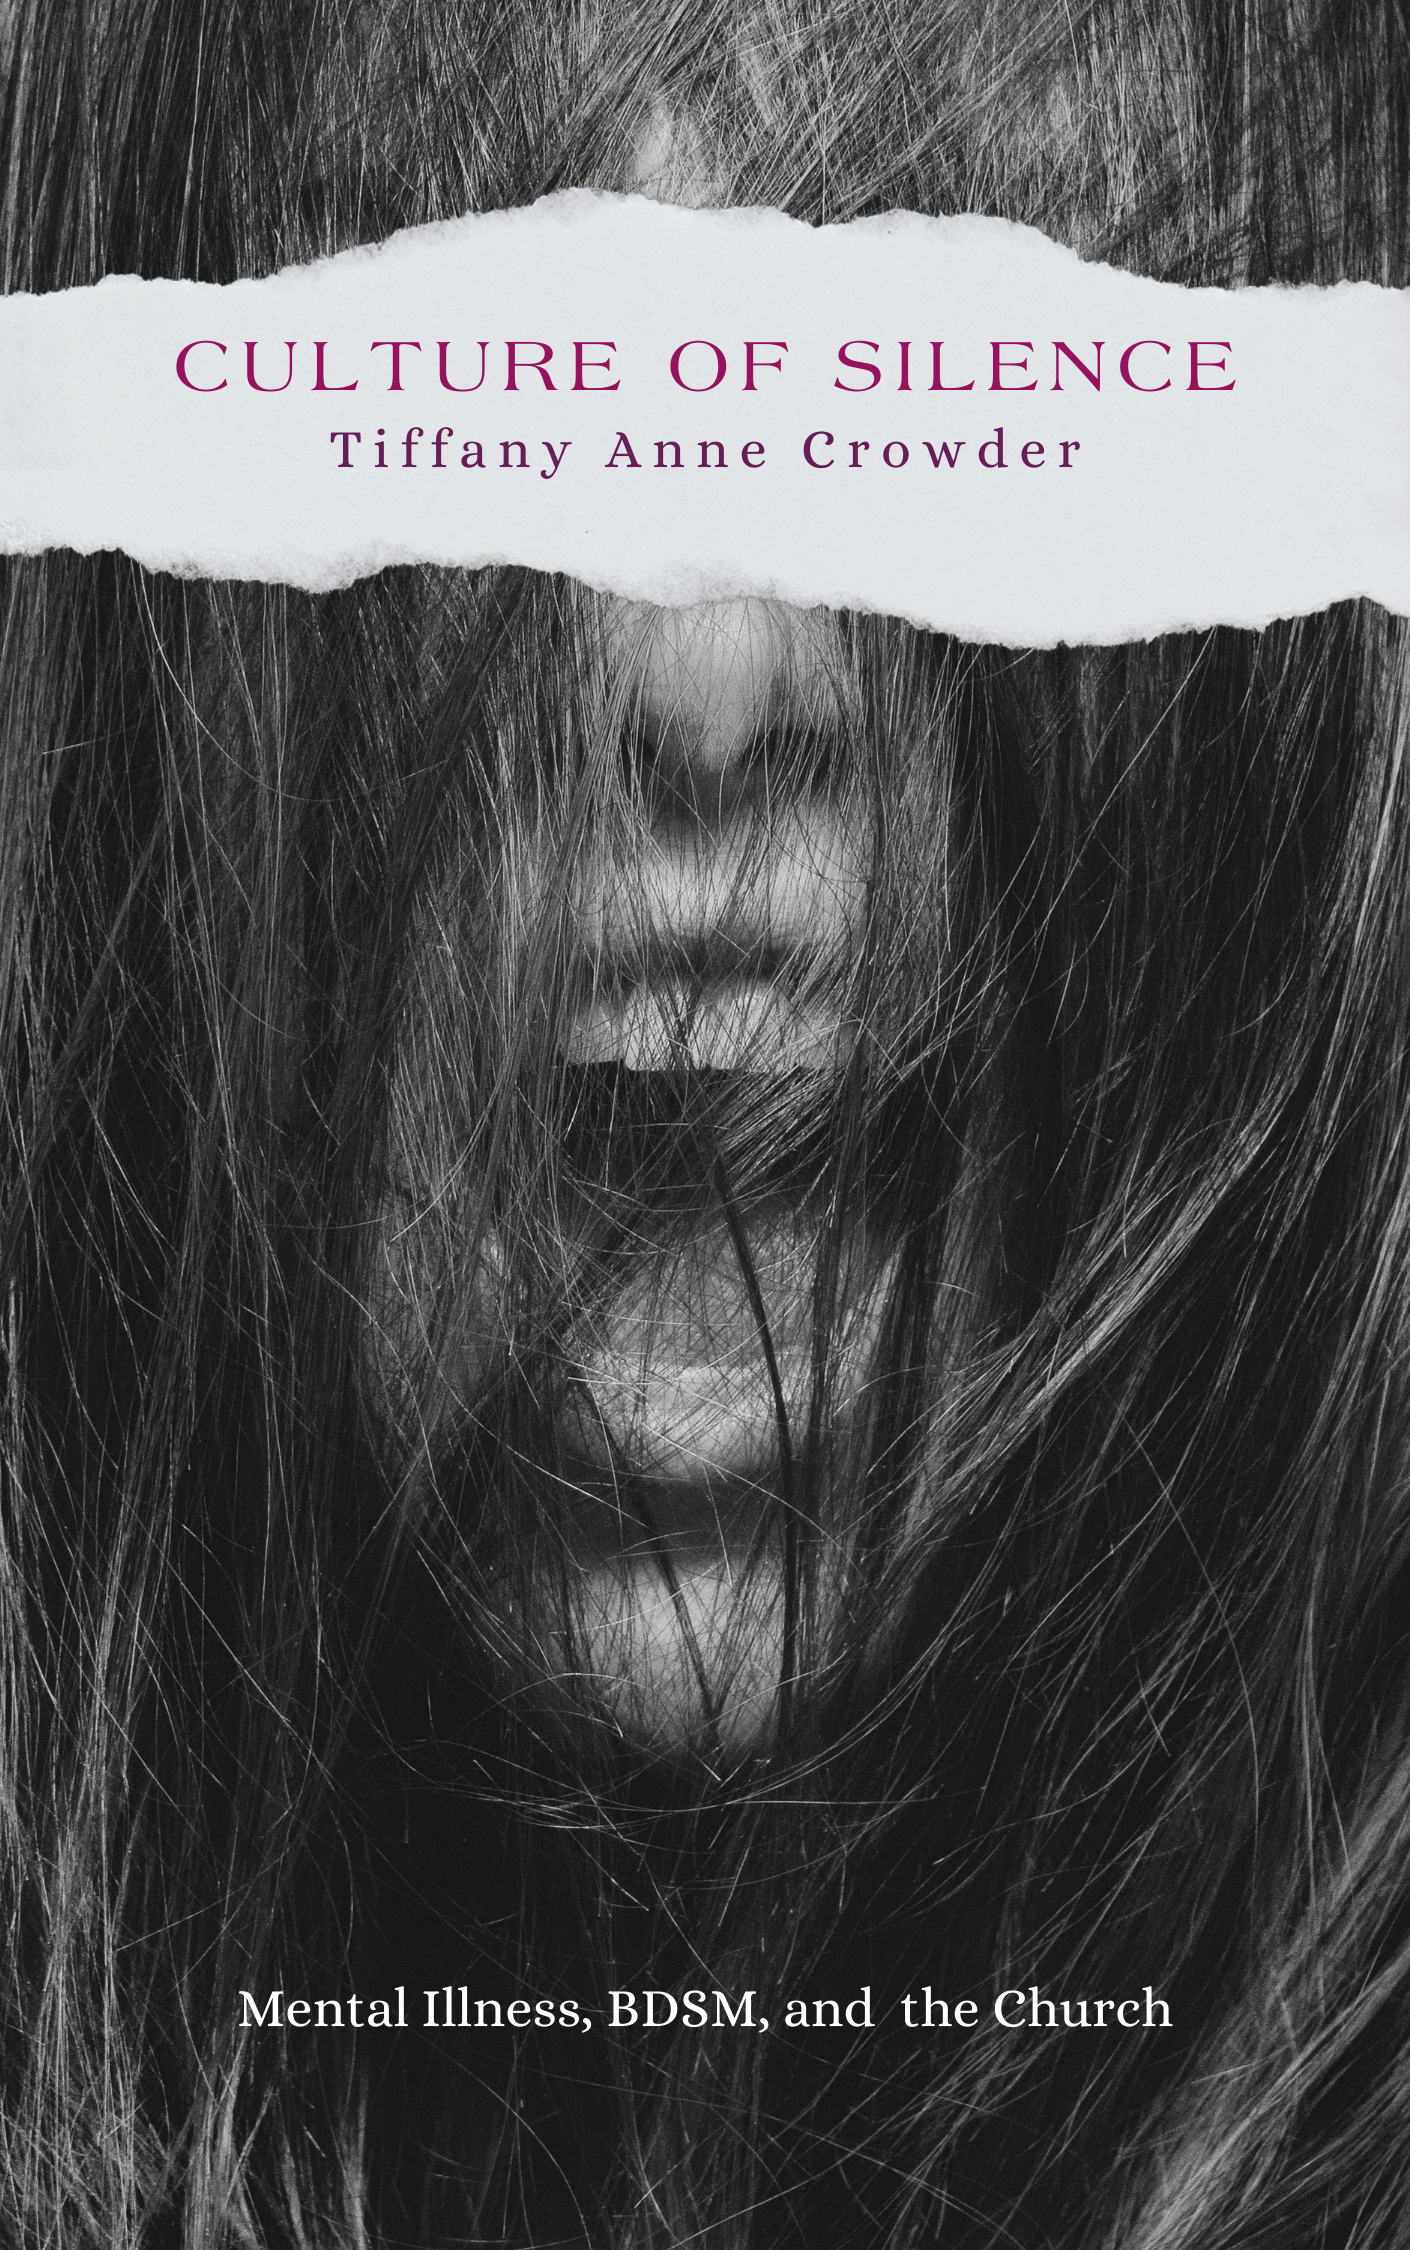 Woman screaming in black and white with hair in her face.

Text: Culture of Silence: Mental Illness, BDSM, and the Church

Tiffany Anne Crowder